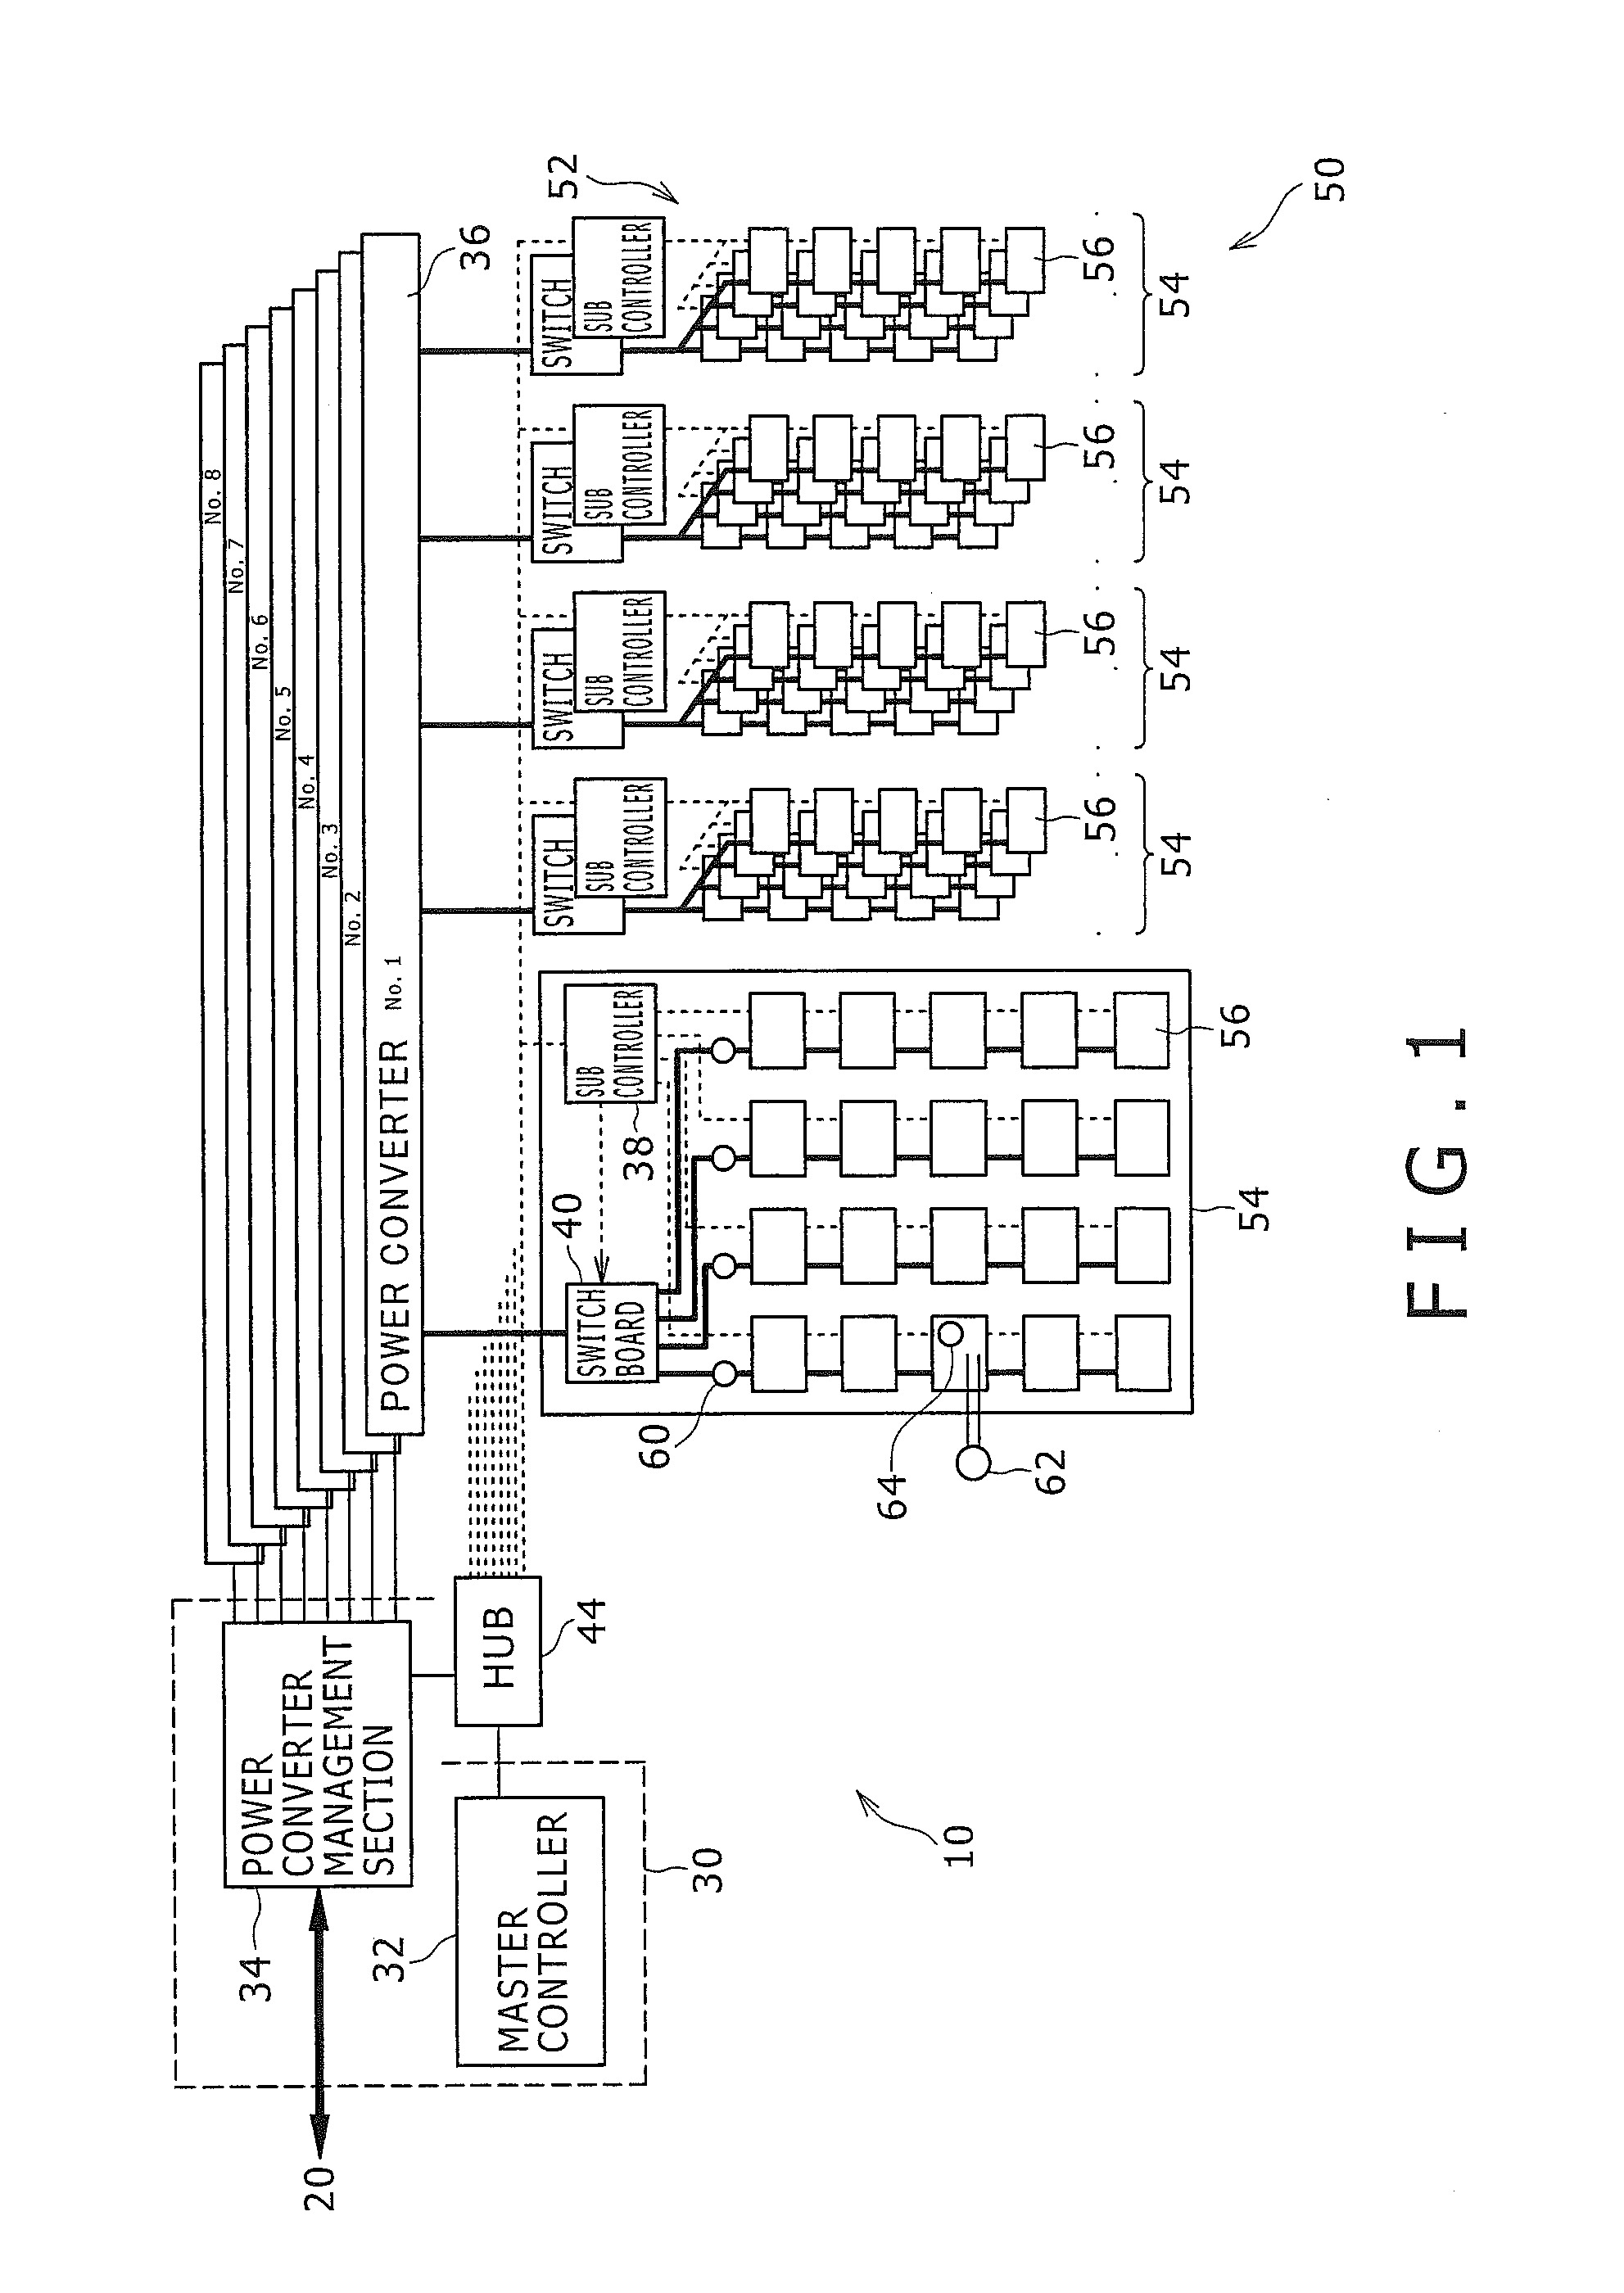 Battery charge and discharge control apparatus and method for controlling battery charge and discharge